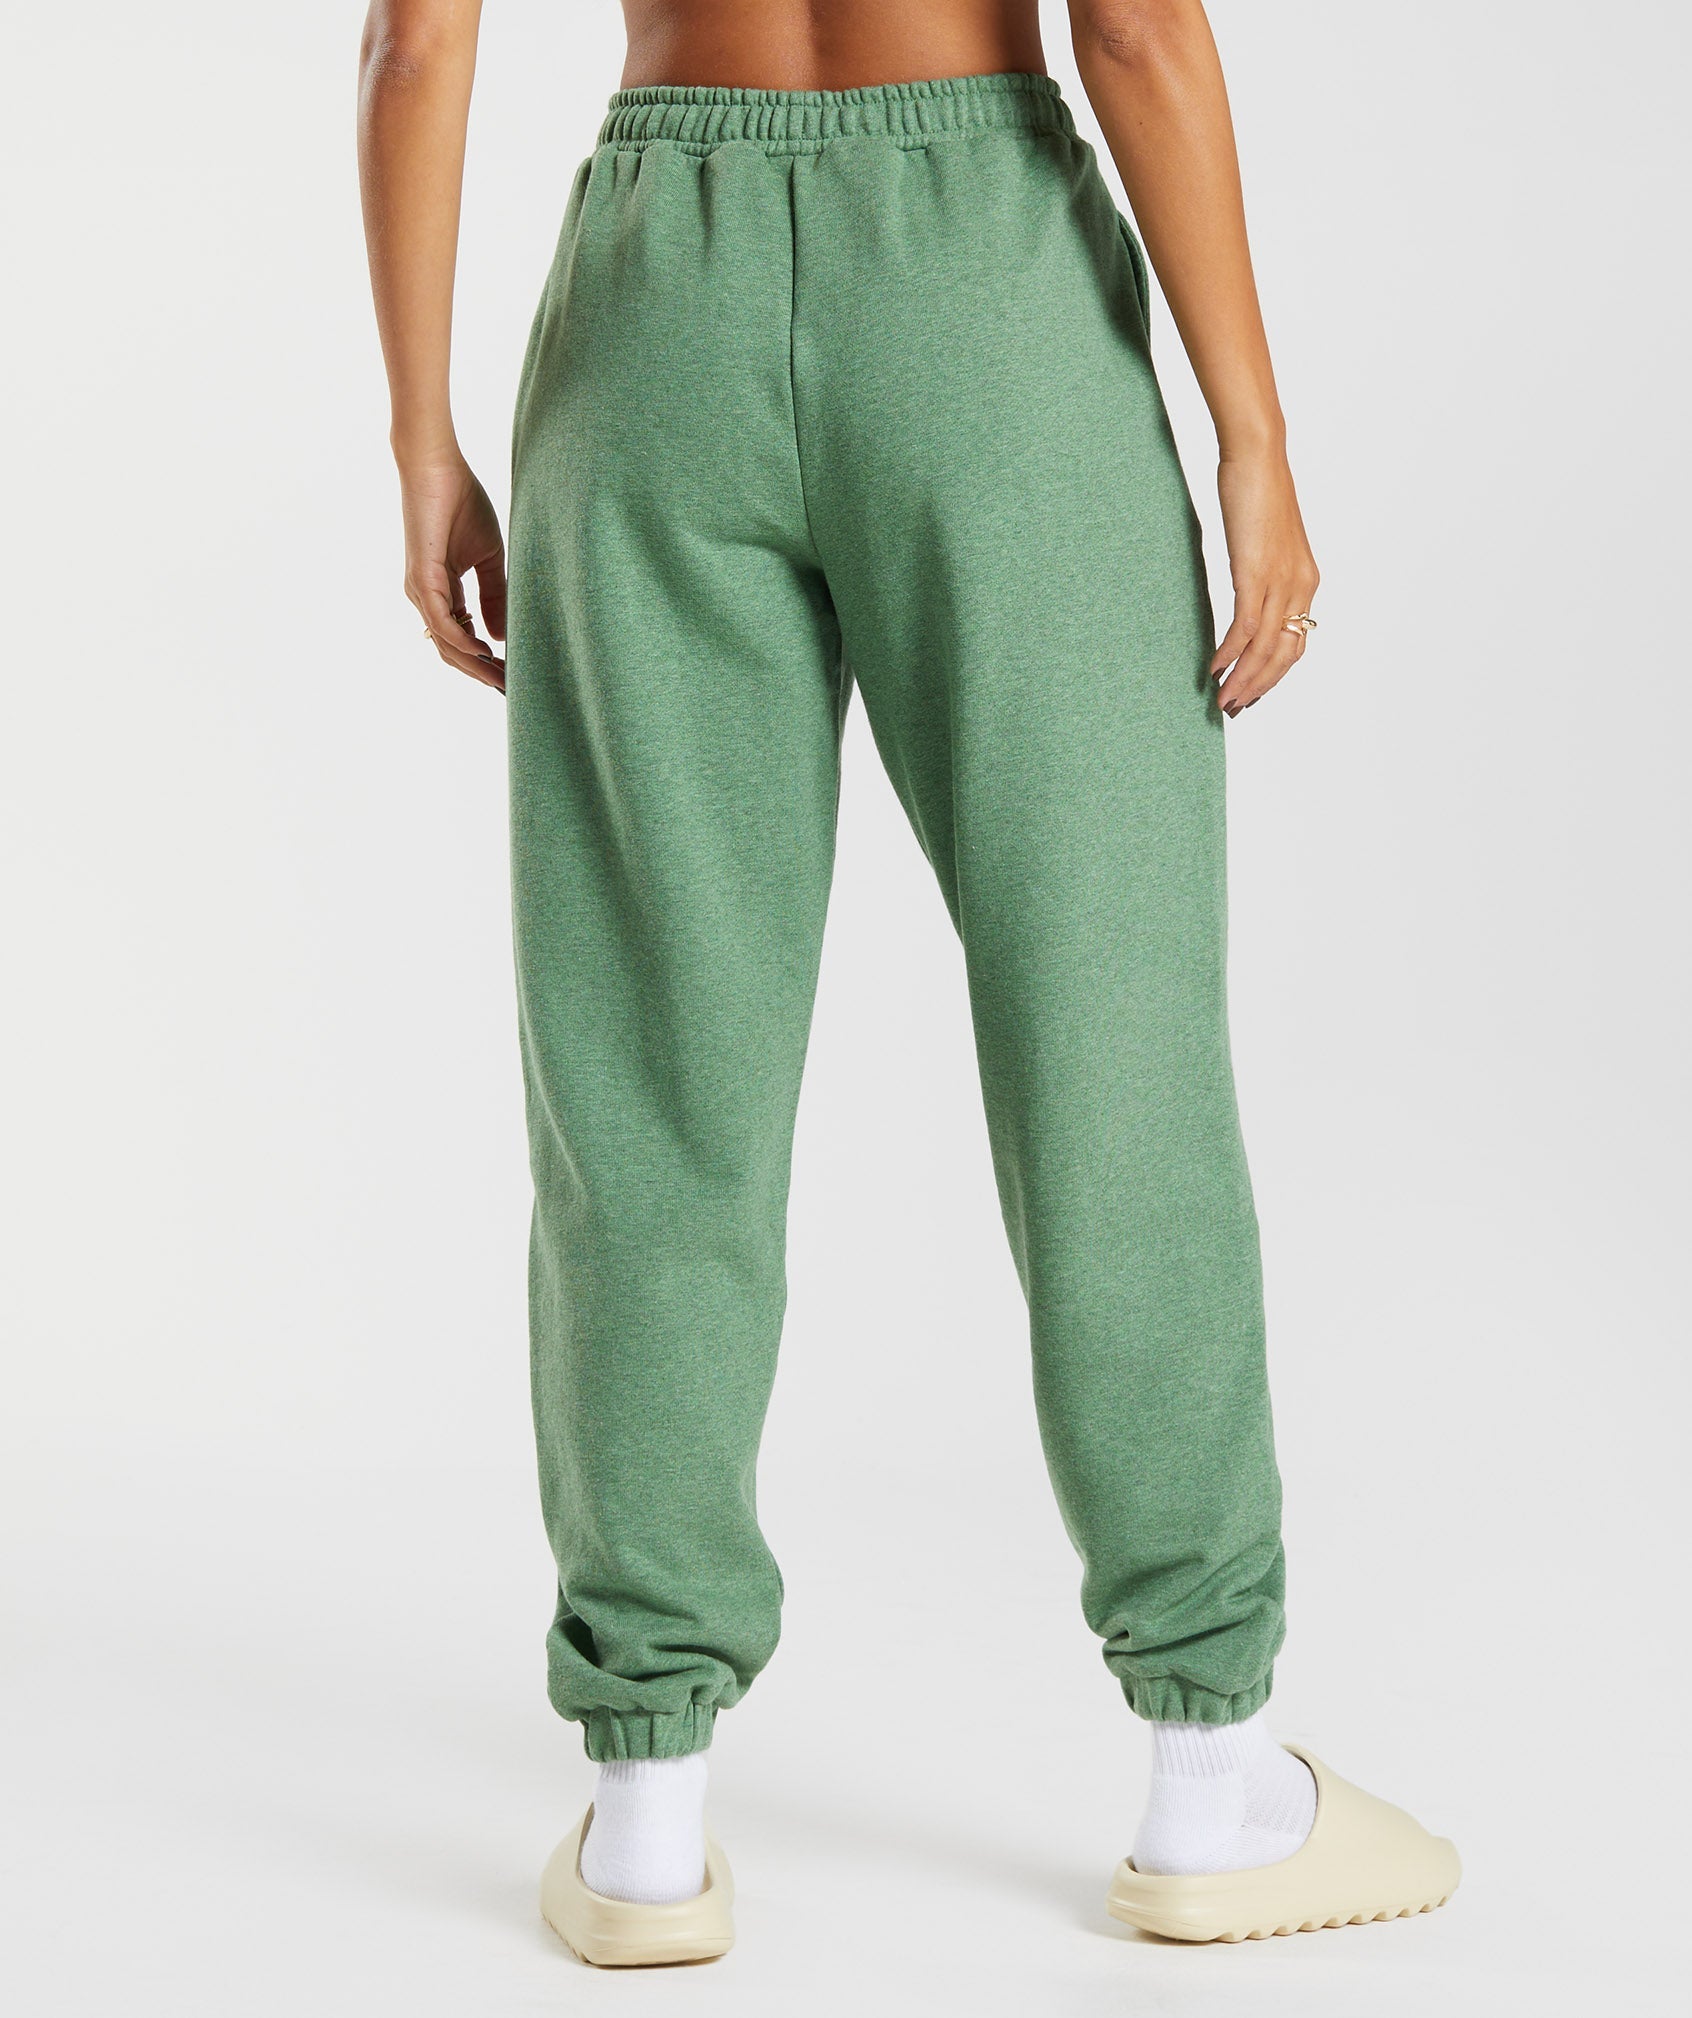 Gymshark Recess Joggers Green Size M - $40 (20% Off Retail) - From Claire